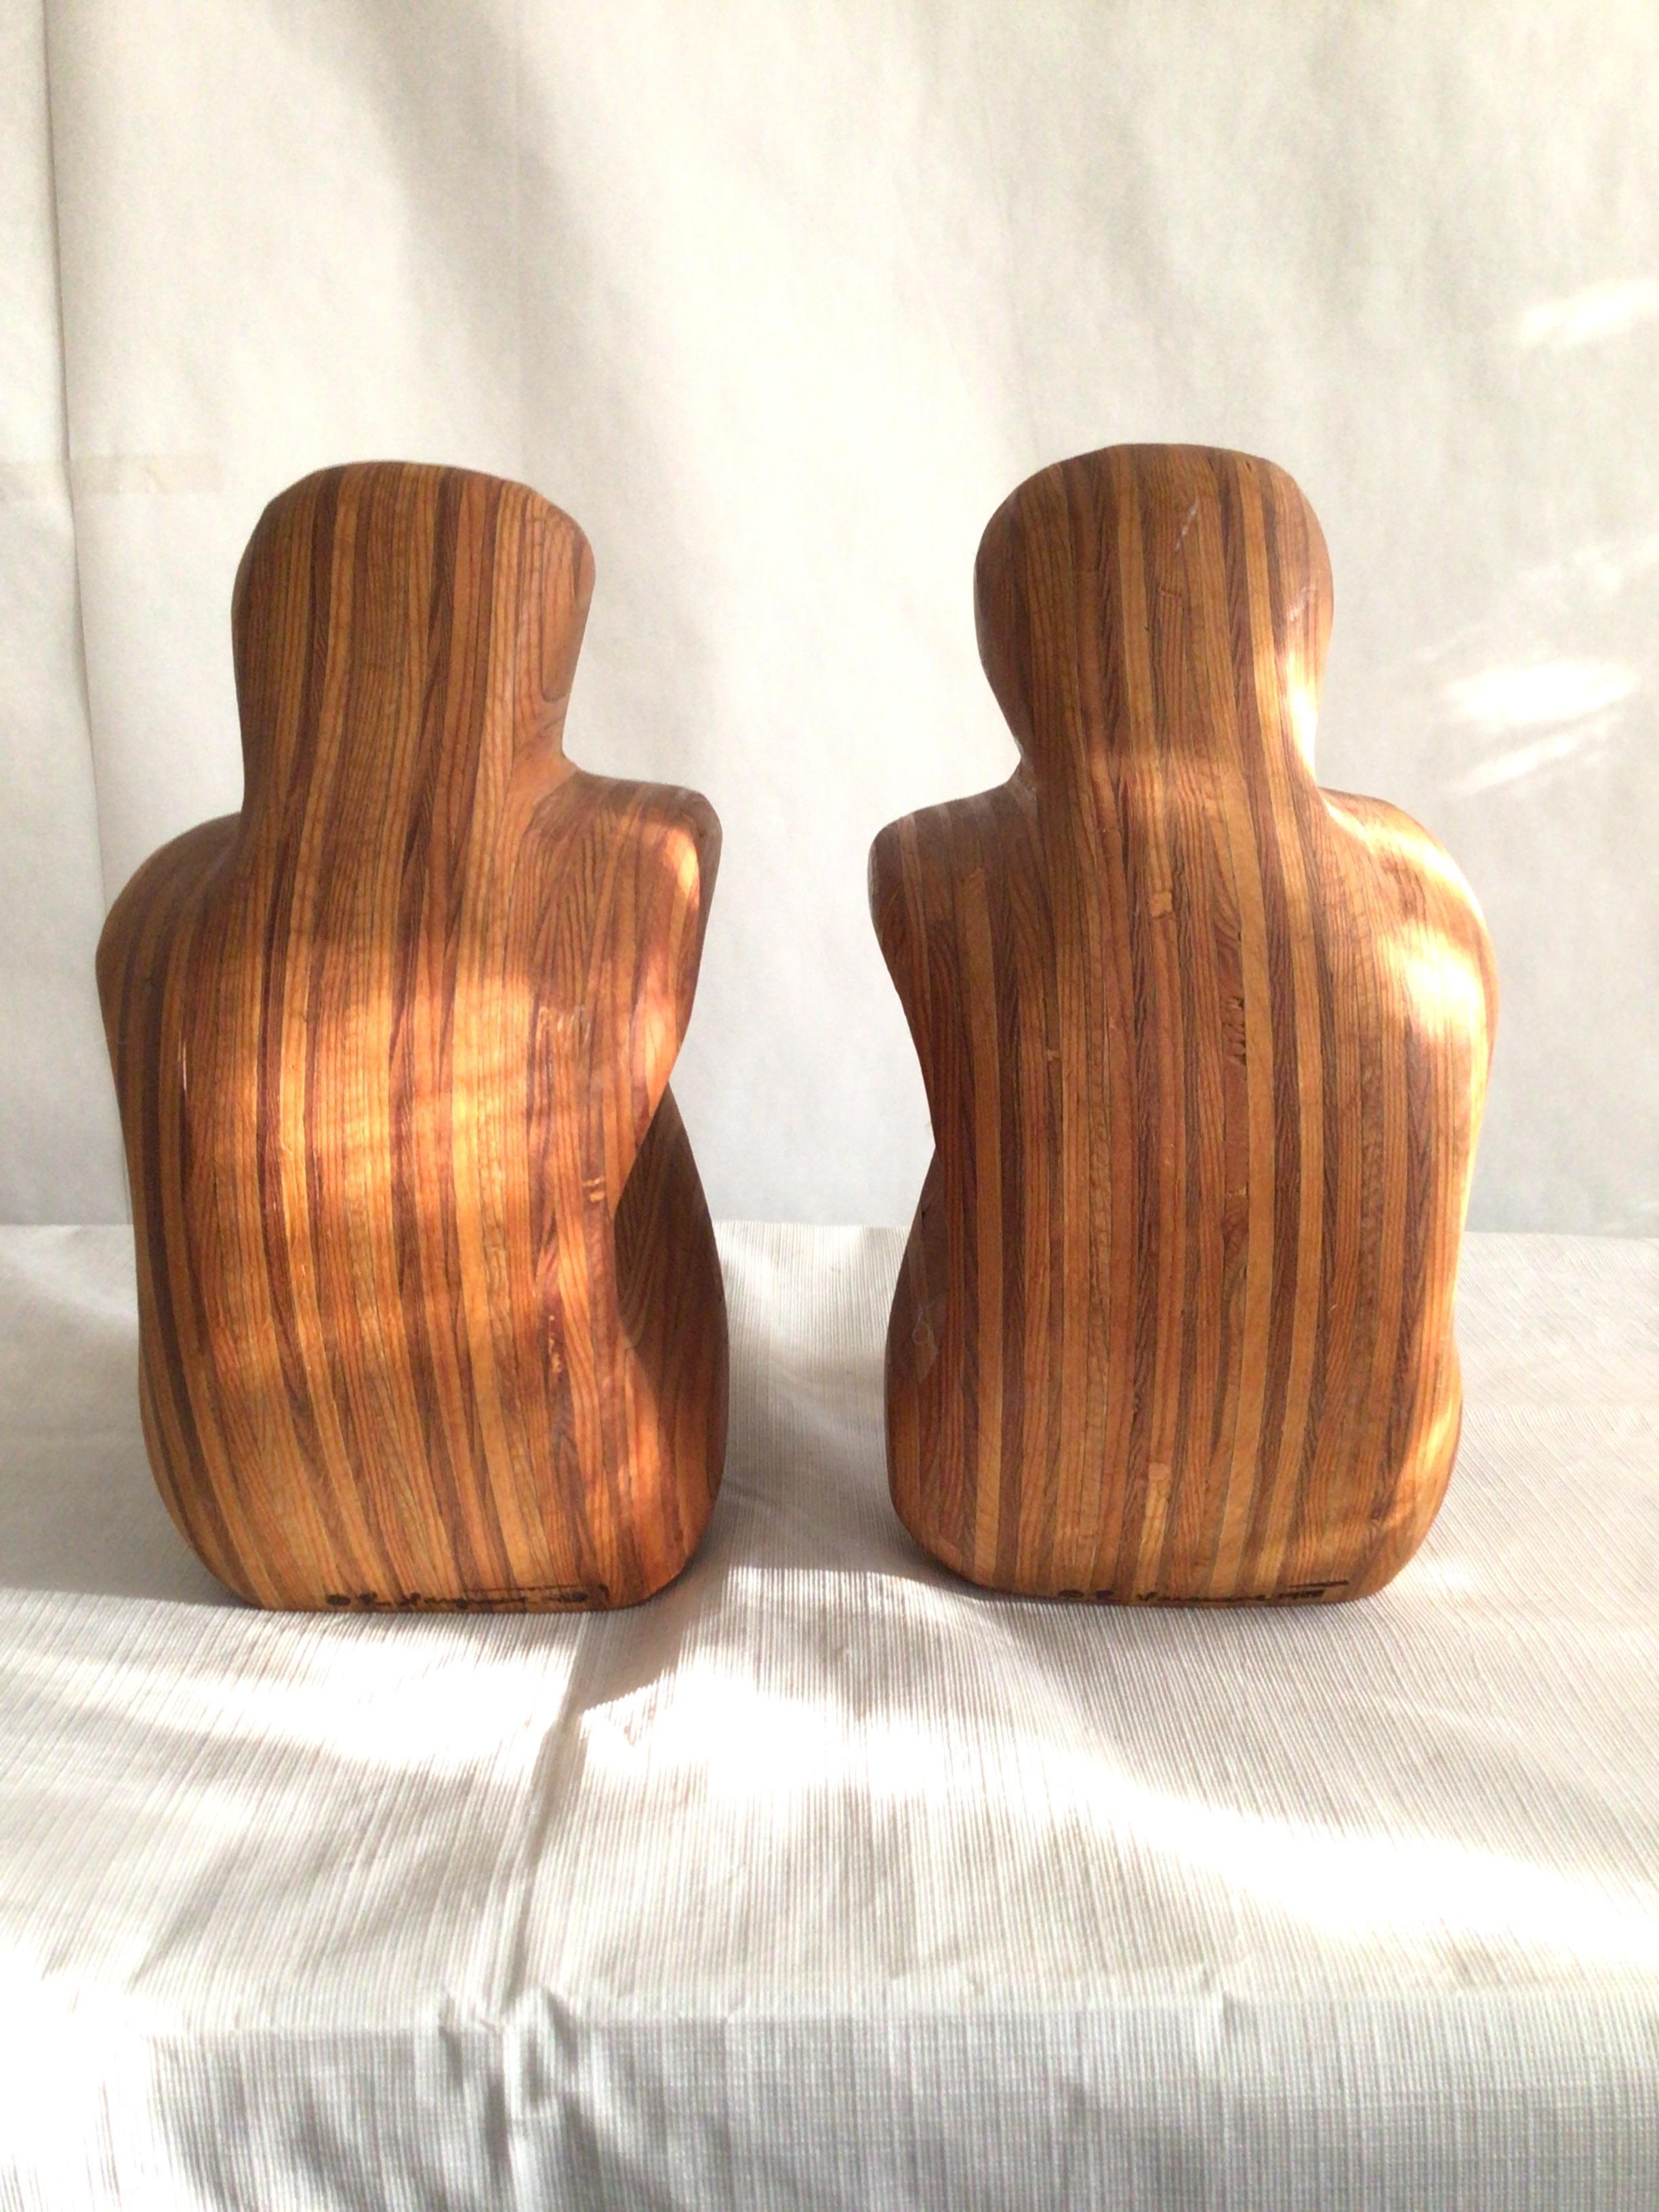 Late 20th Century 1980s Swirled Wood Sculptural Bookends For Sale